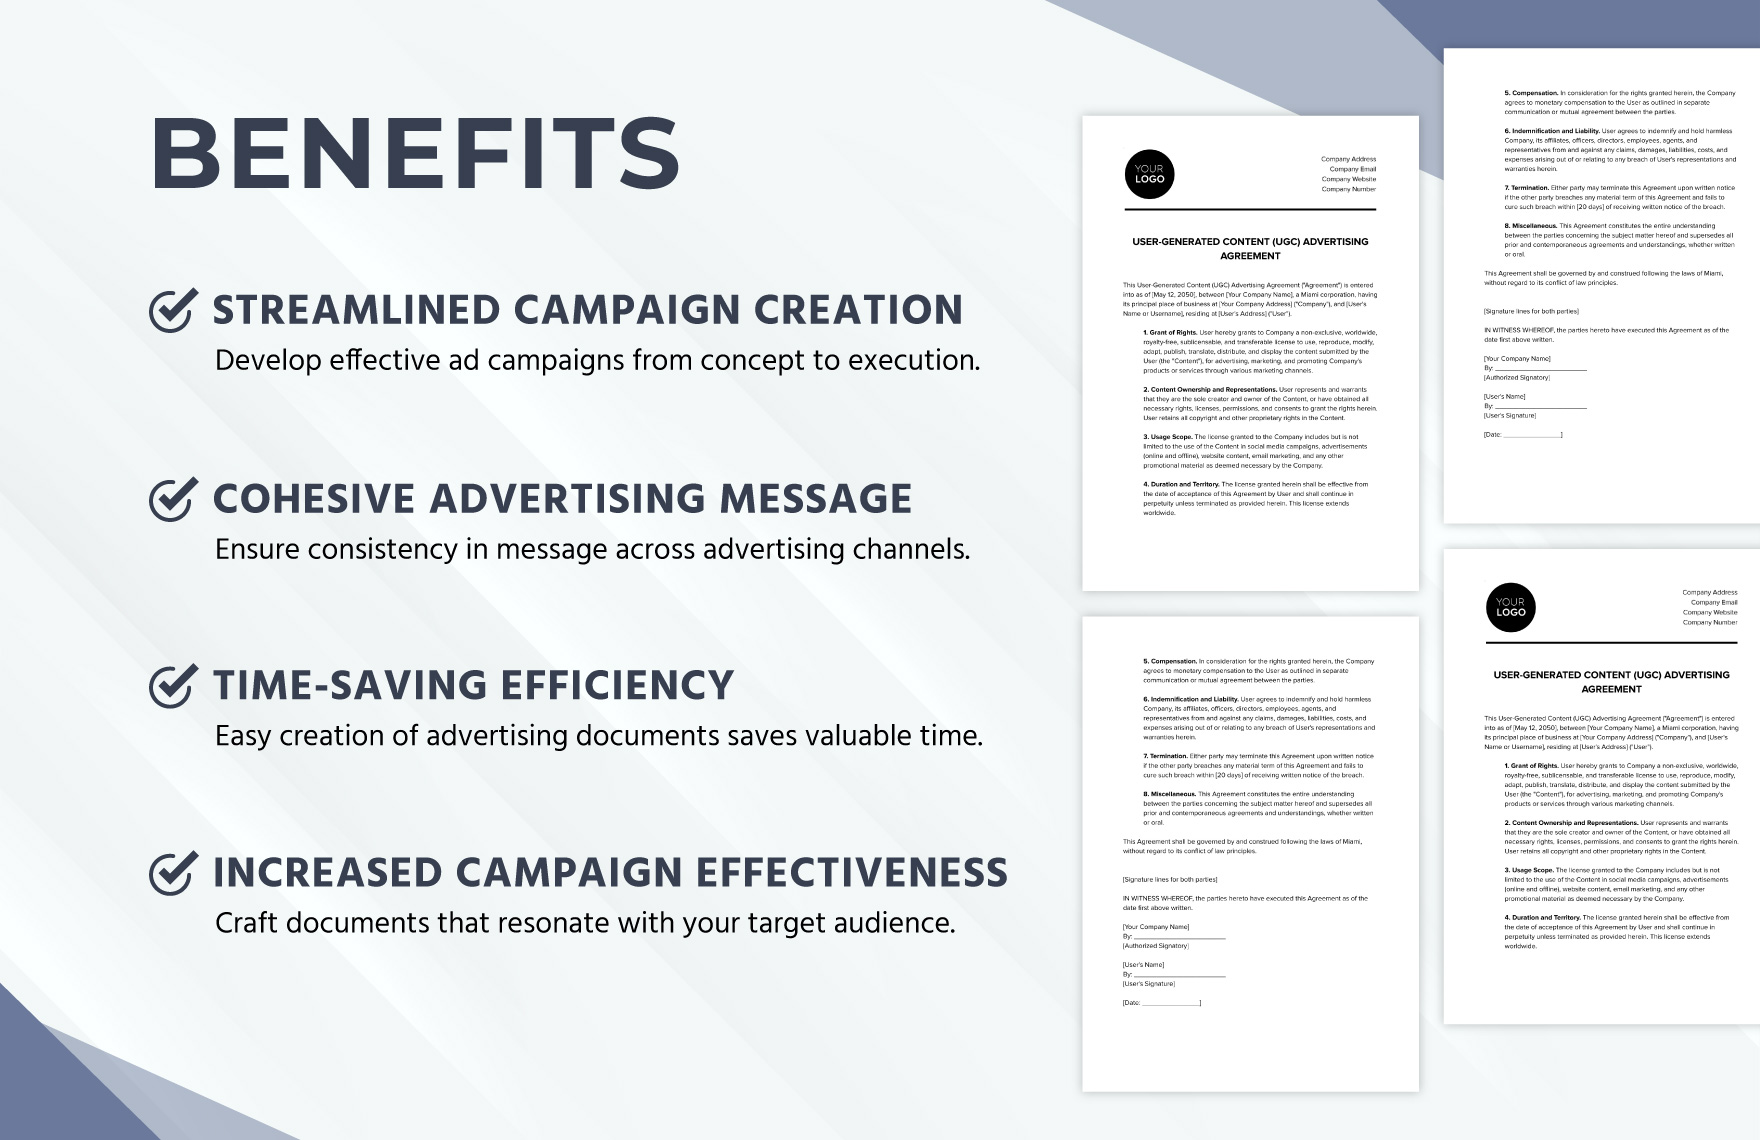 User-Generated Content (UGC) Advertising Agreement Template